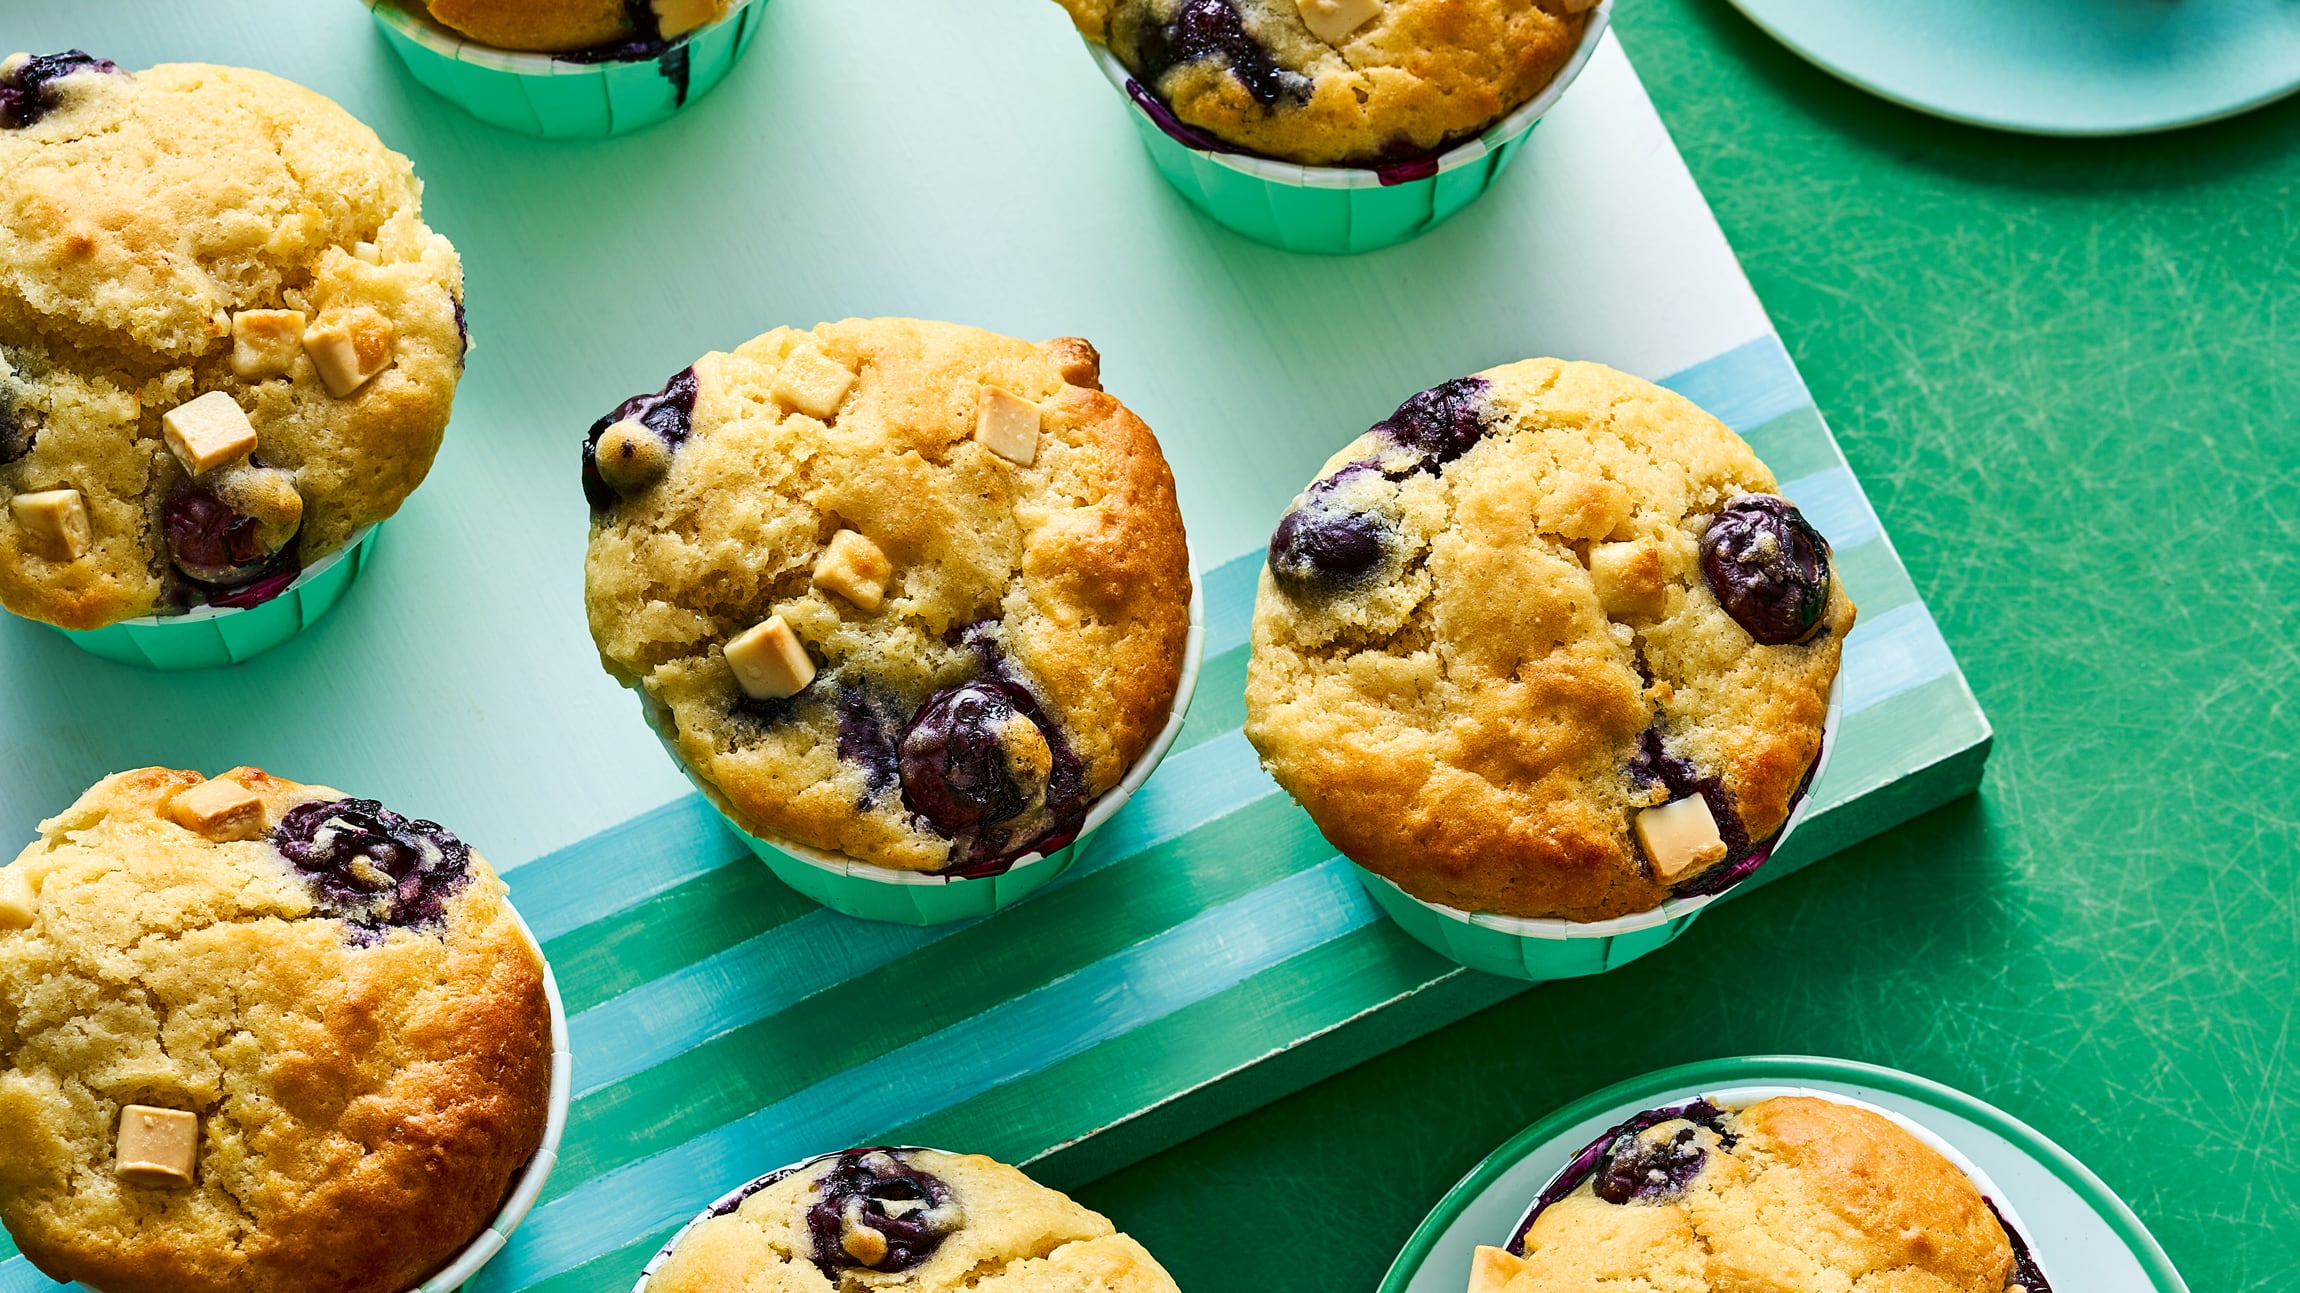 White chocolate and blueberry muffins from Pinch Of Nom Air Fryer